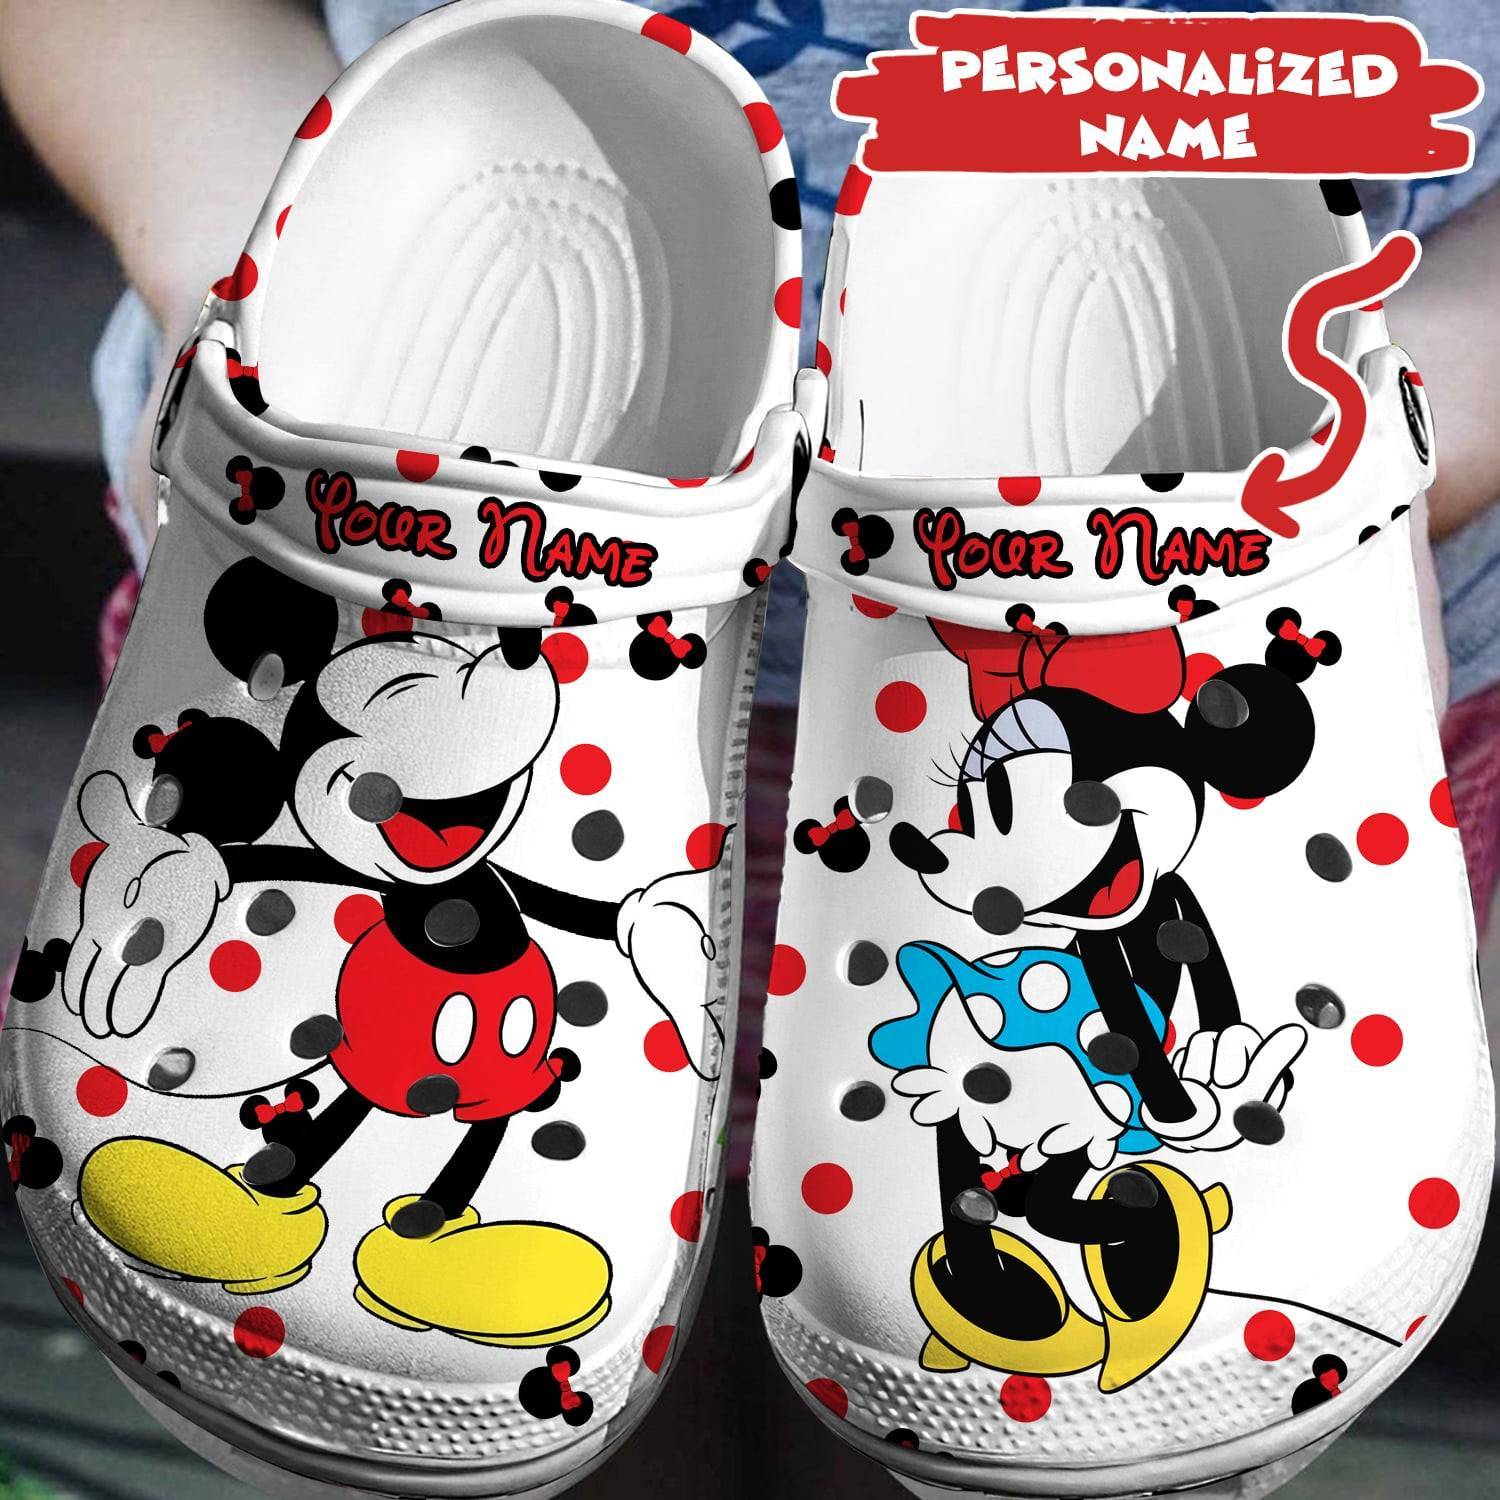 Customize Your Disney Adventure: Personalized Mickey Minnie Crocs 3D Clog Shoes